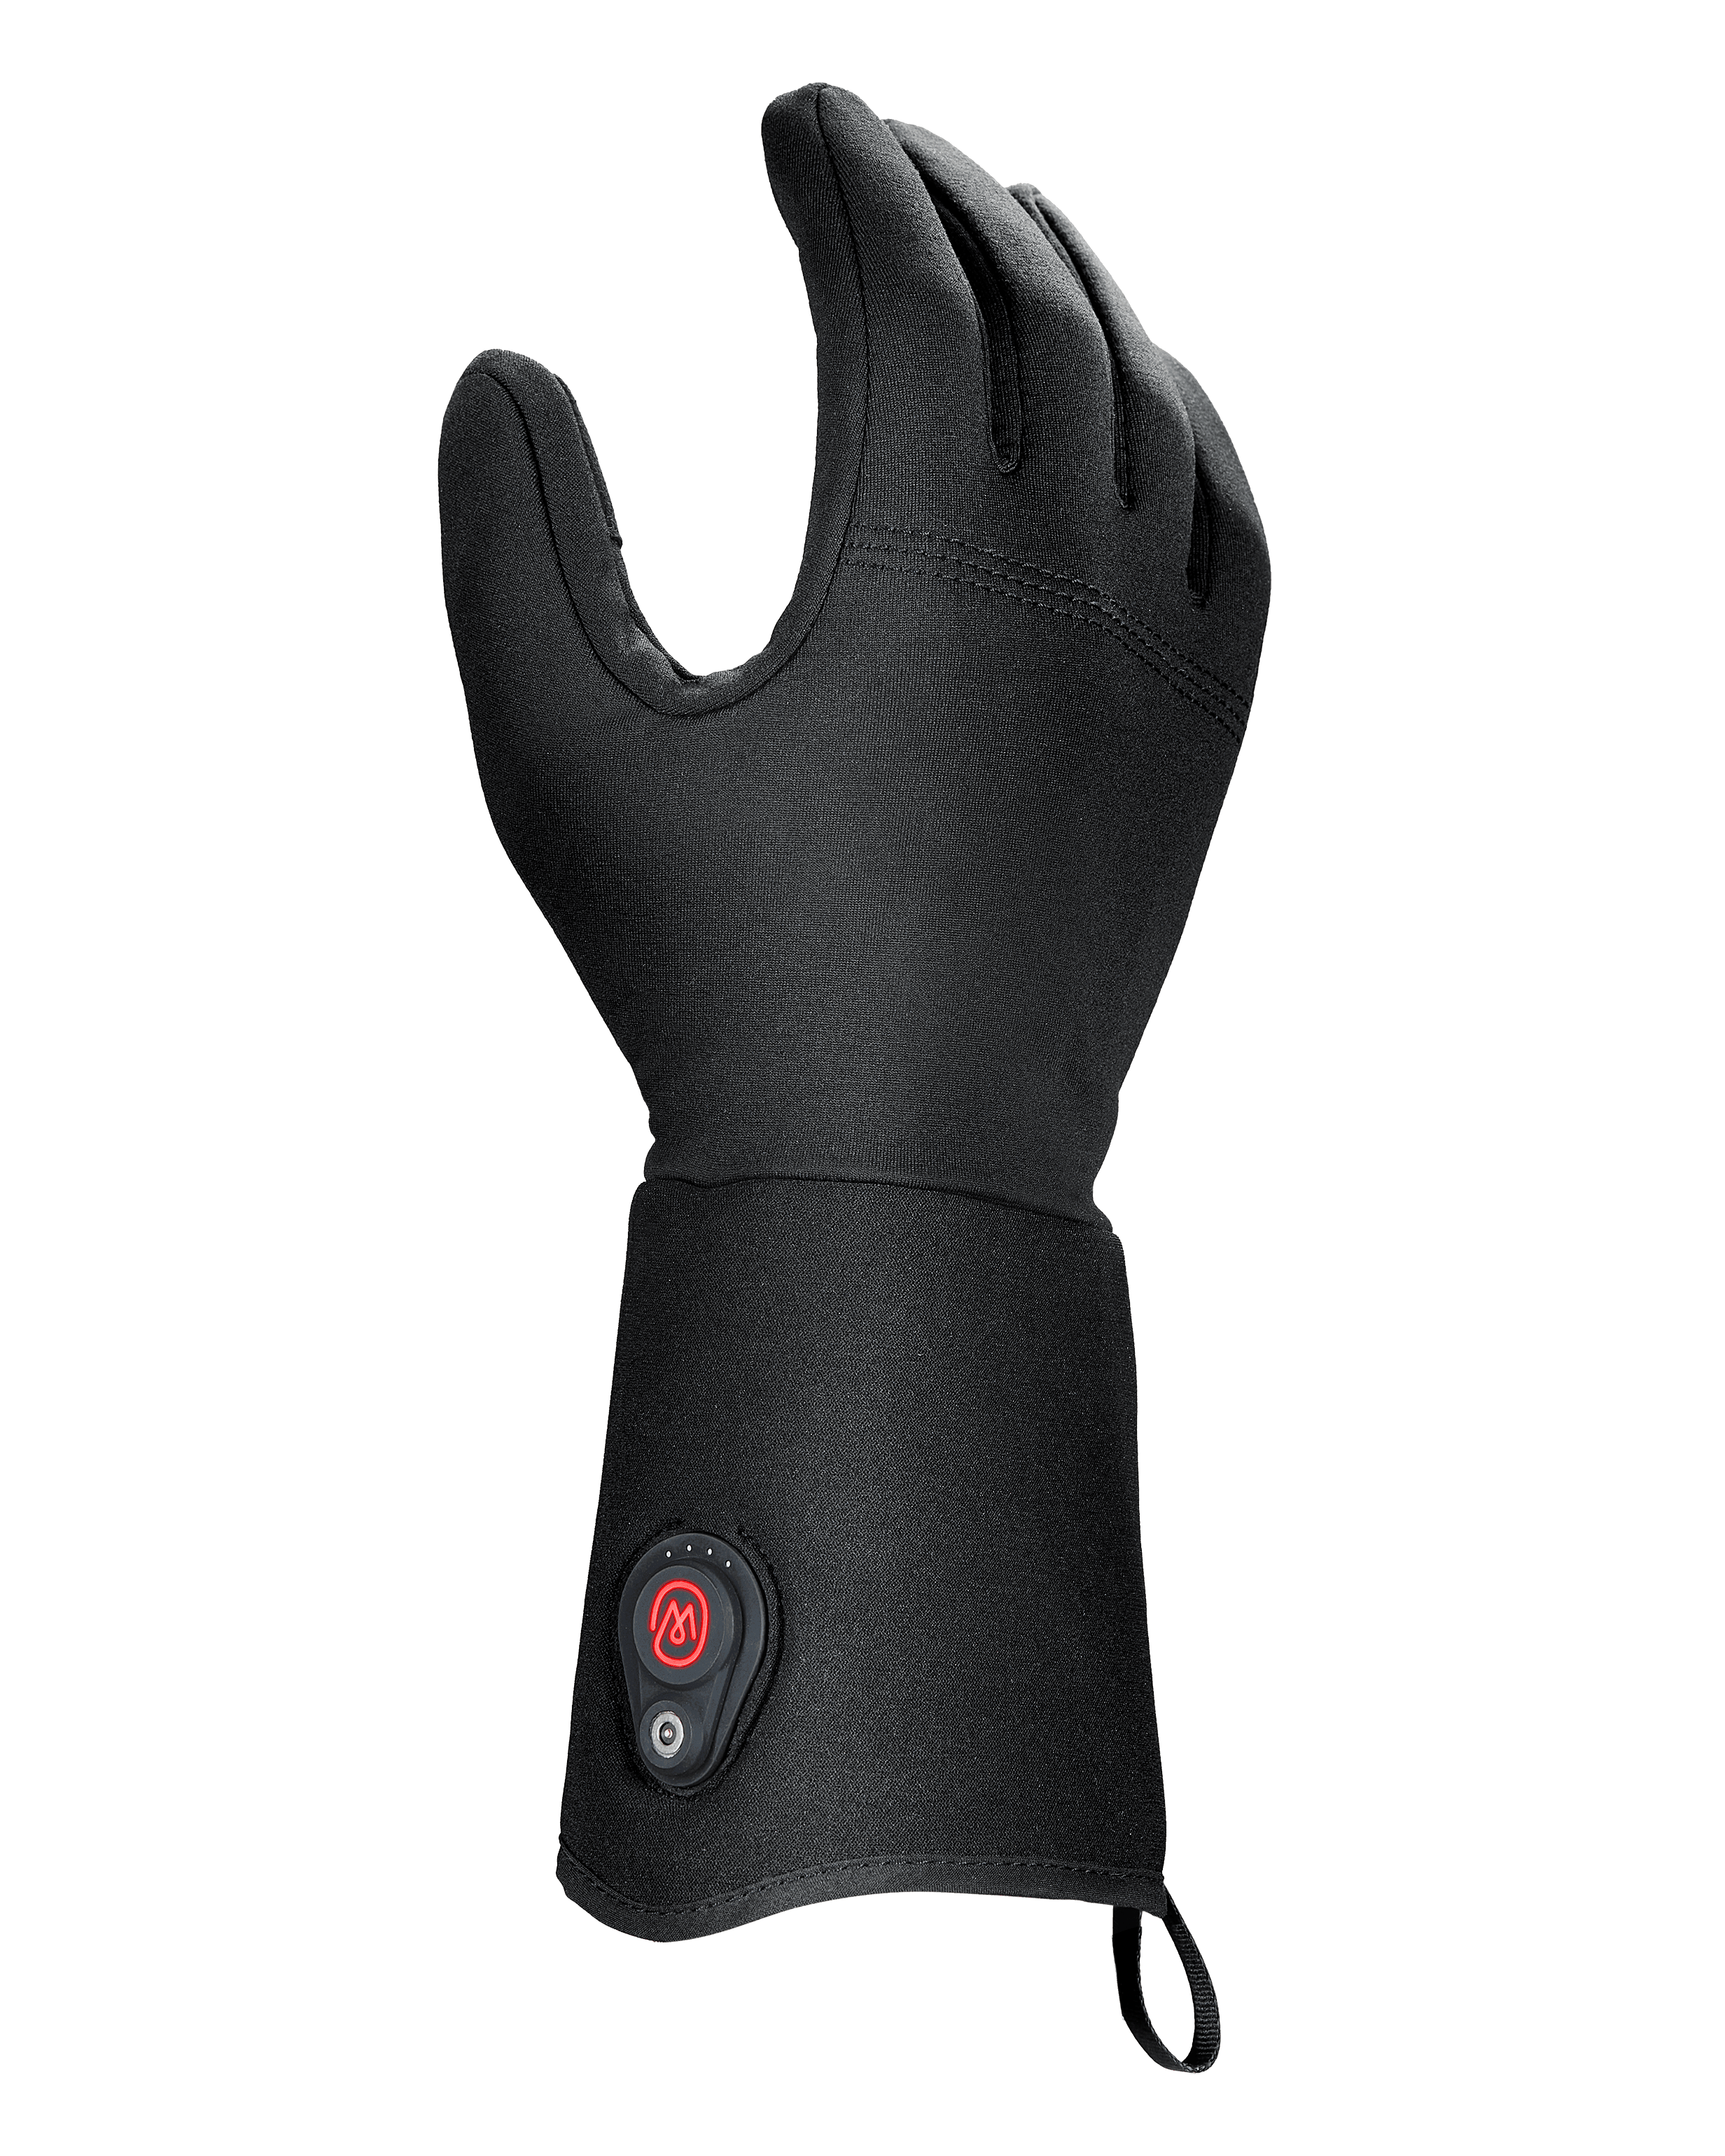 SnapConnect Heated Glove Liners (Open Box)